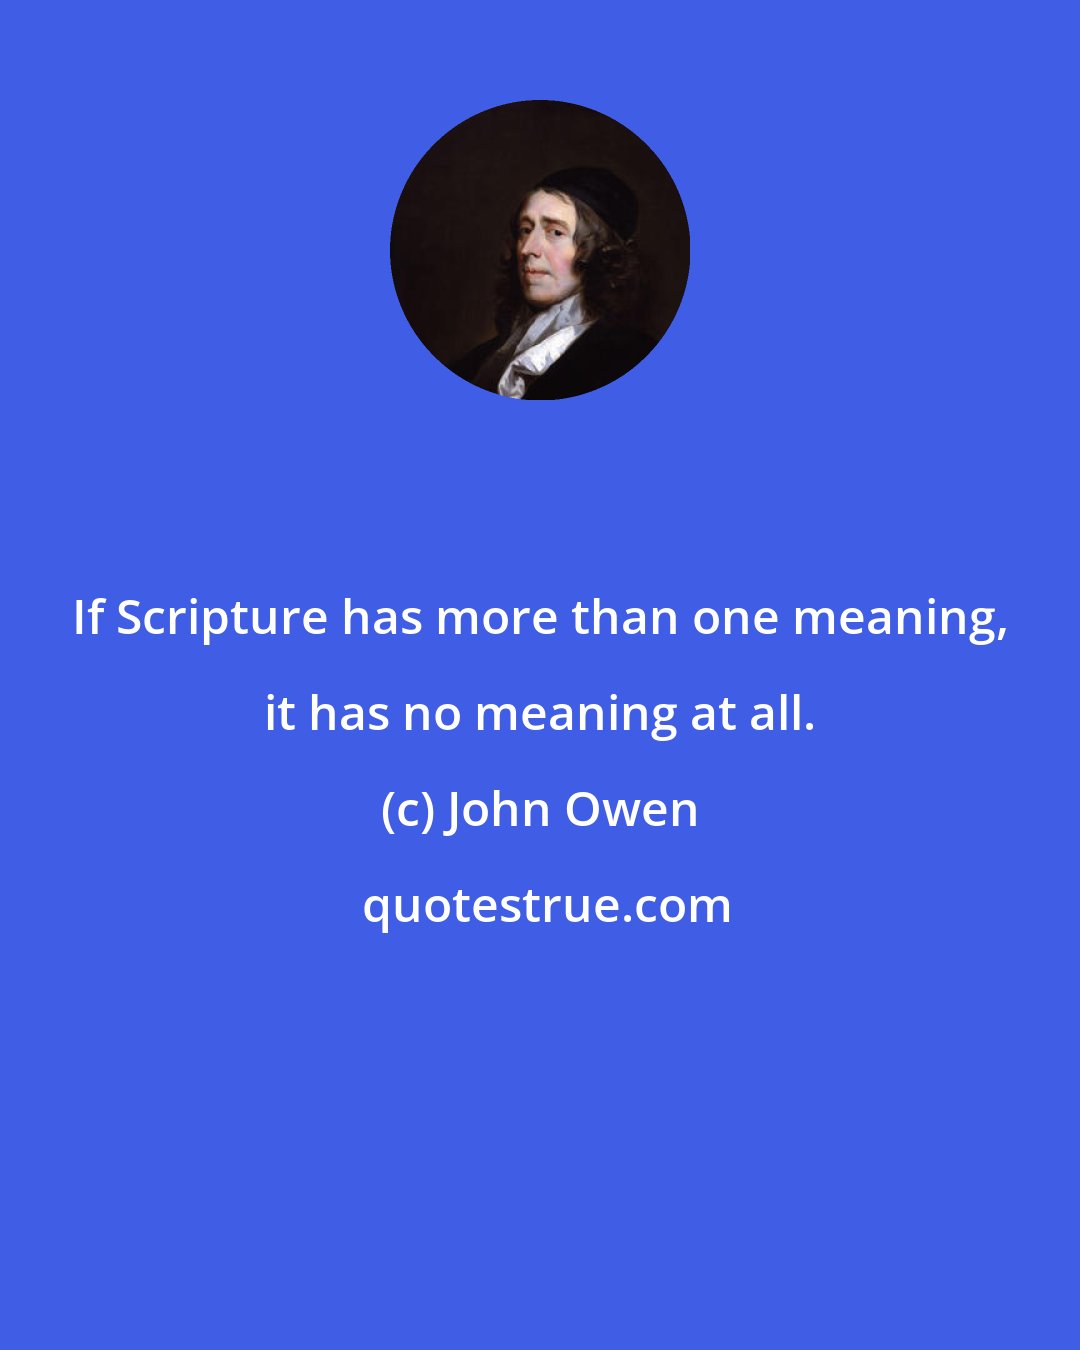 John Owen: If Scripture has more than one meaning, it has no meaning at all.